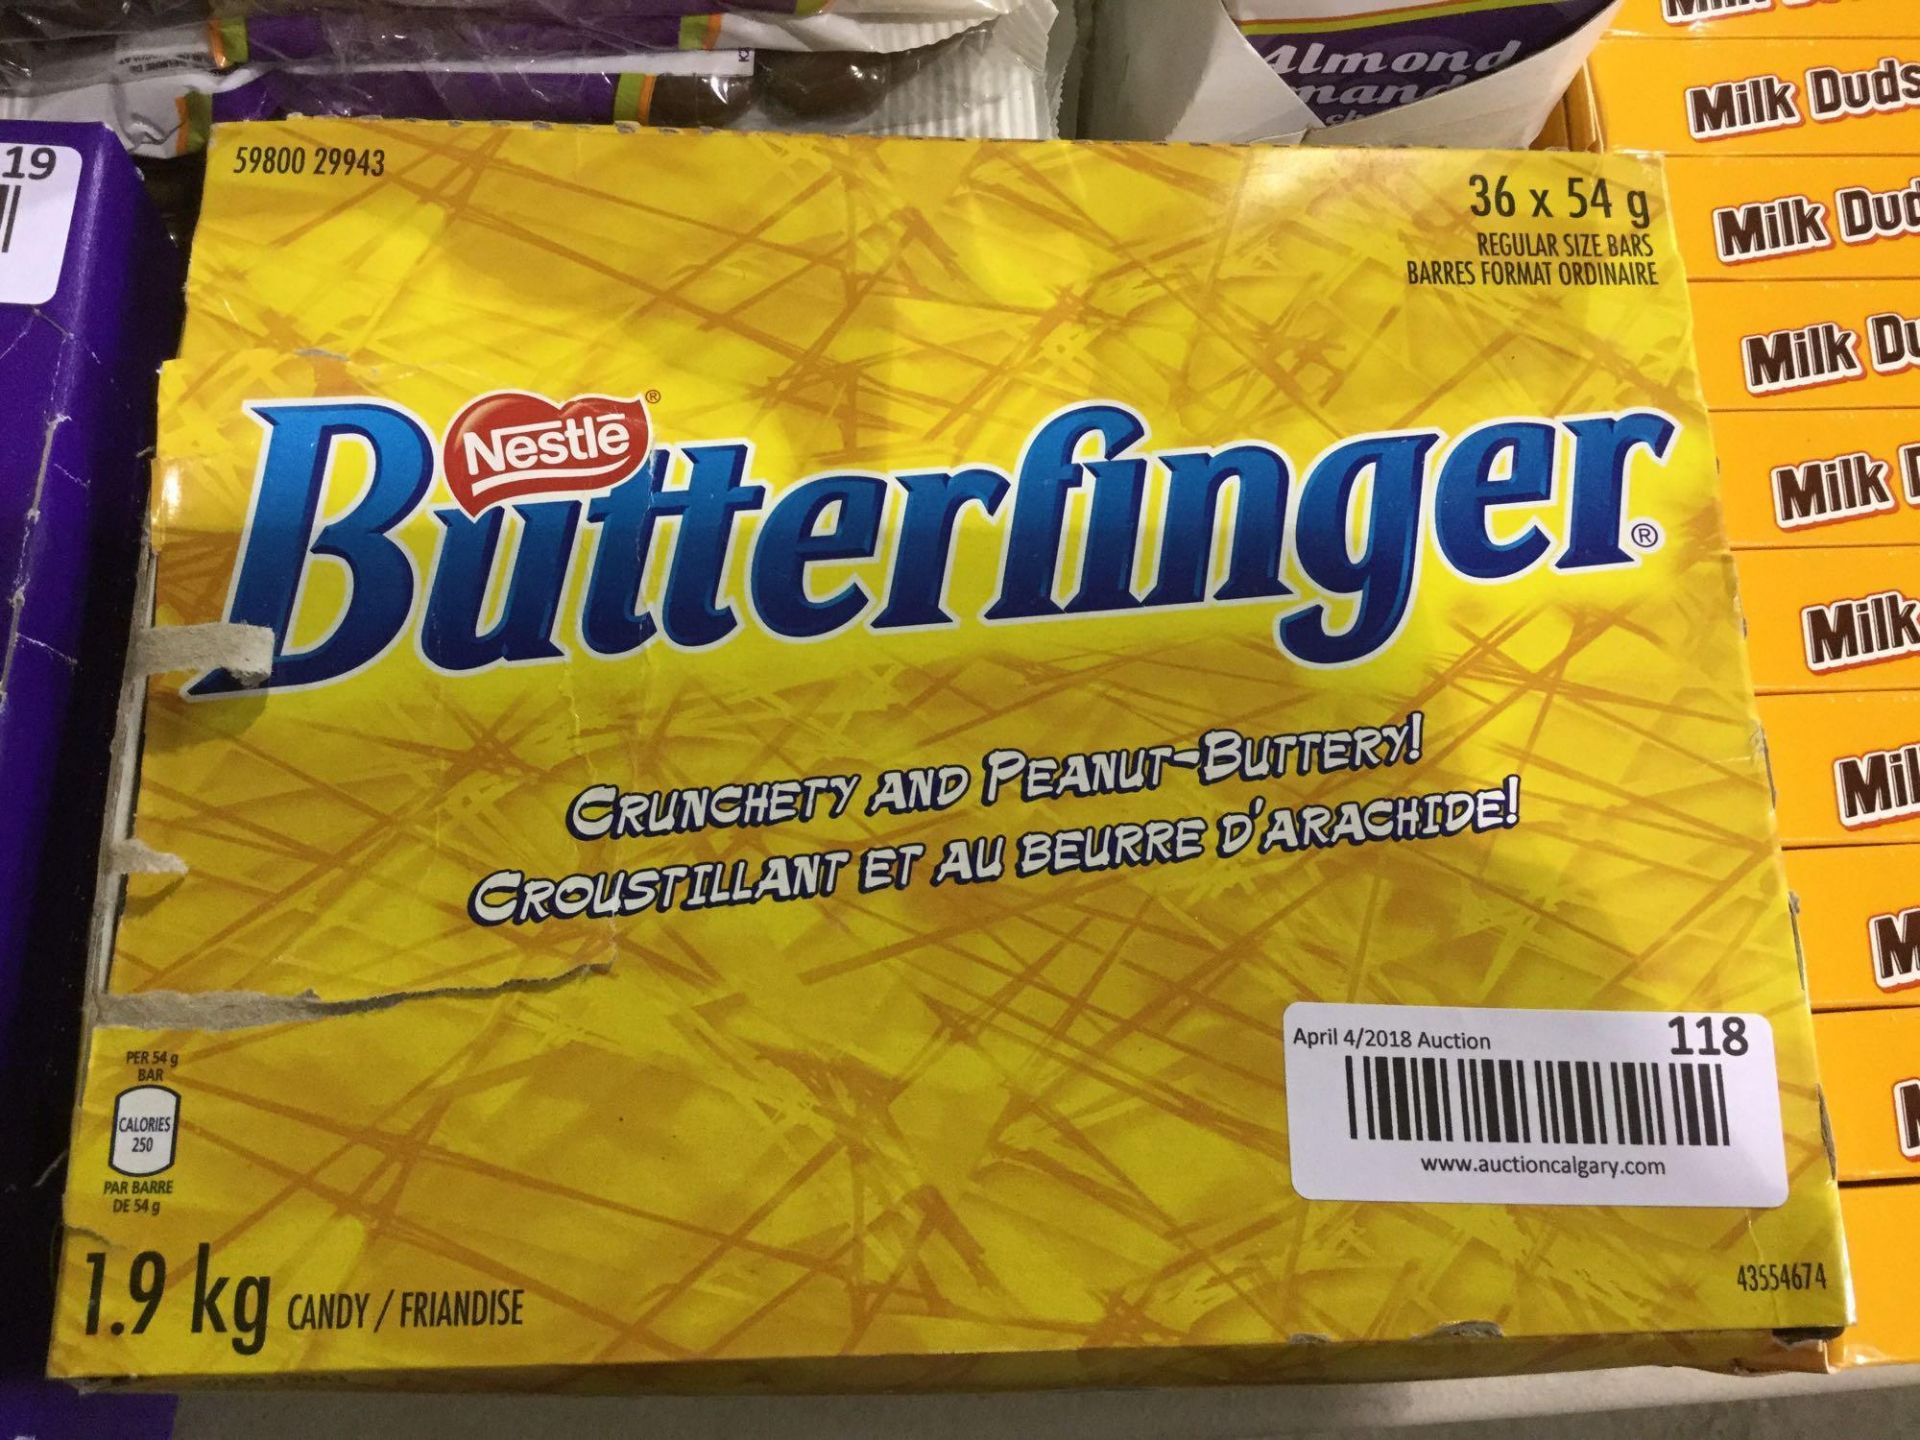 Case of 36 x 54 g Butterfingers - Crunchety and Peanut- Buttery